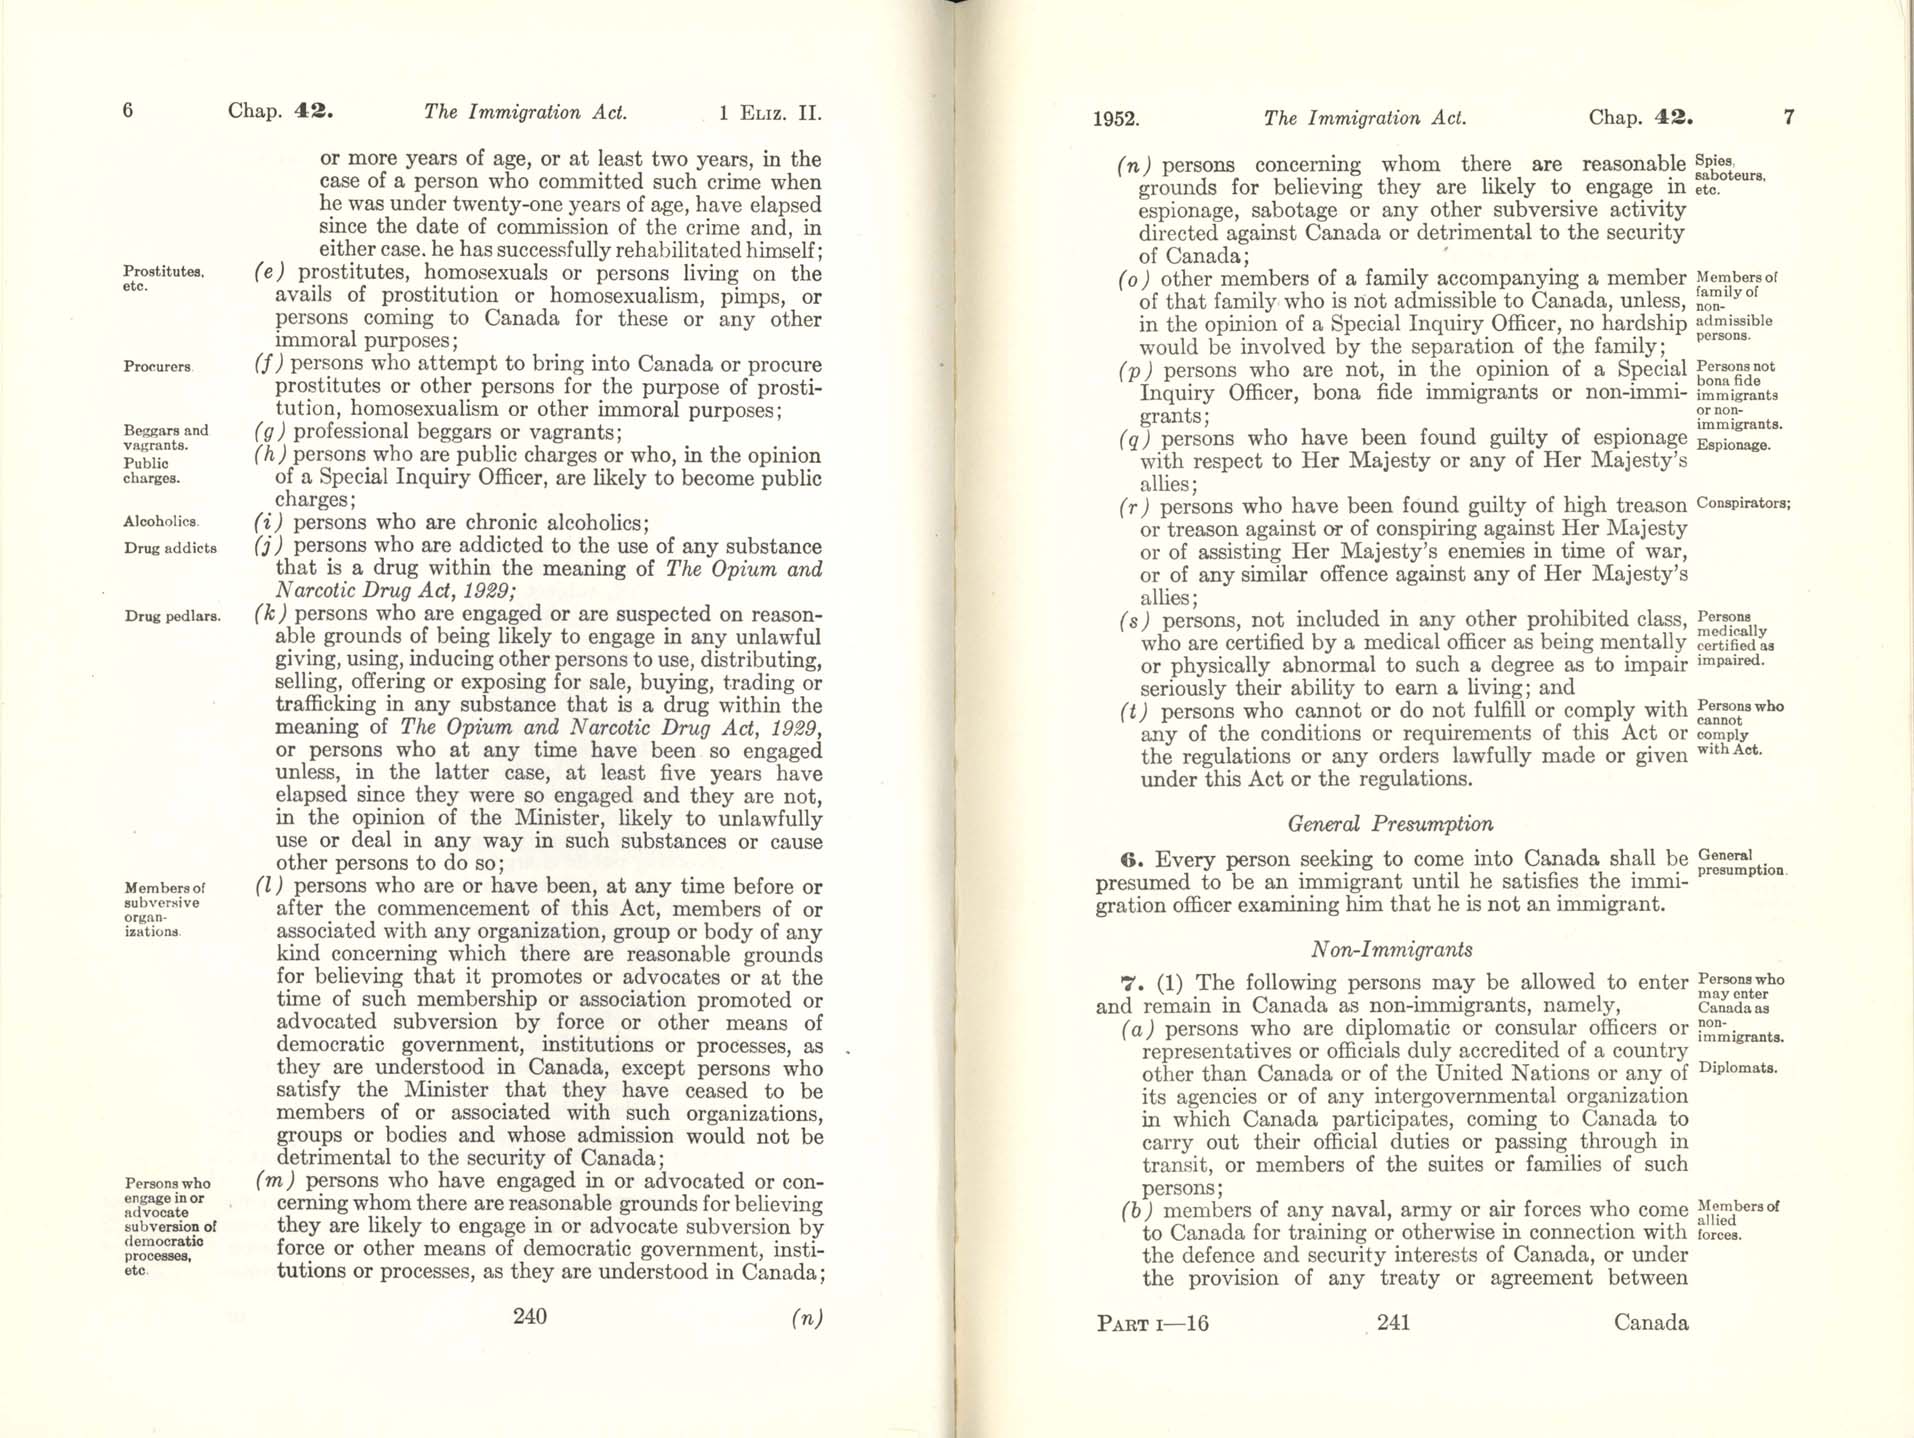 CHAP 42 Page 240, 241 Immigration Act, 1952